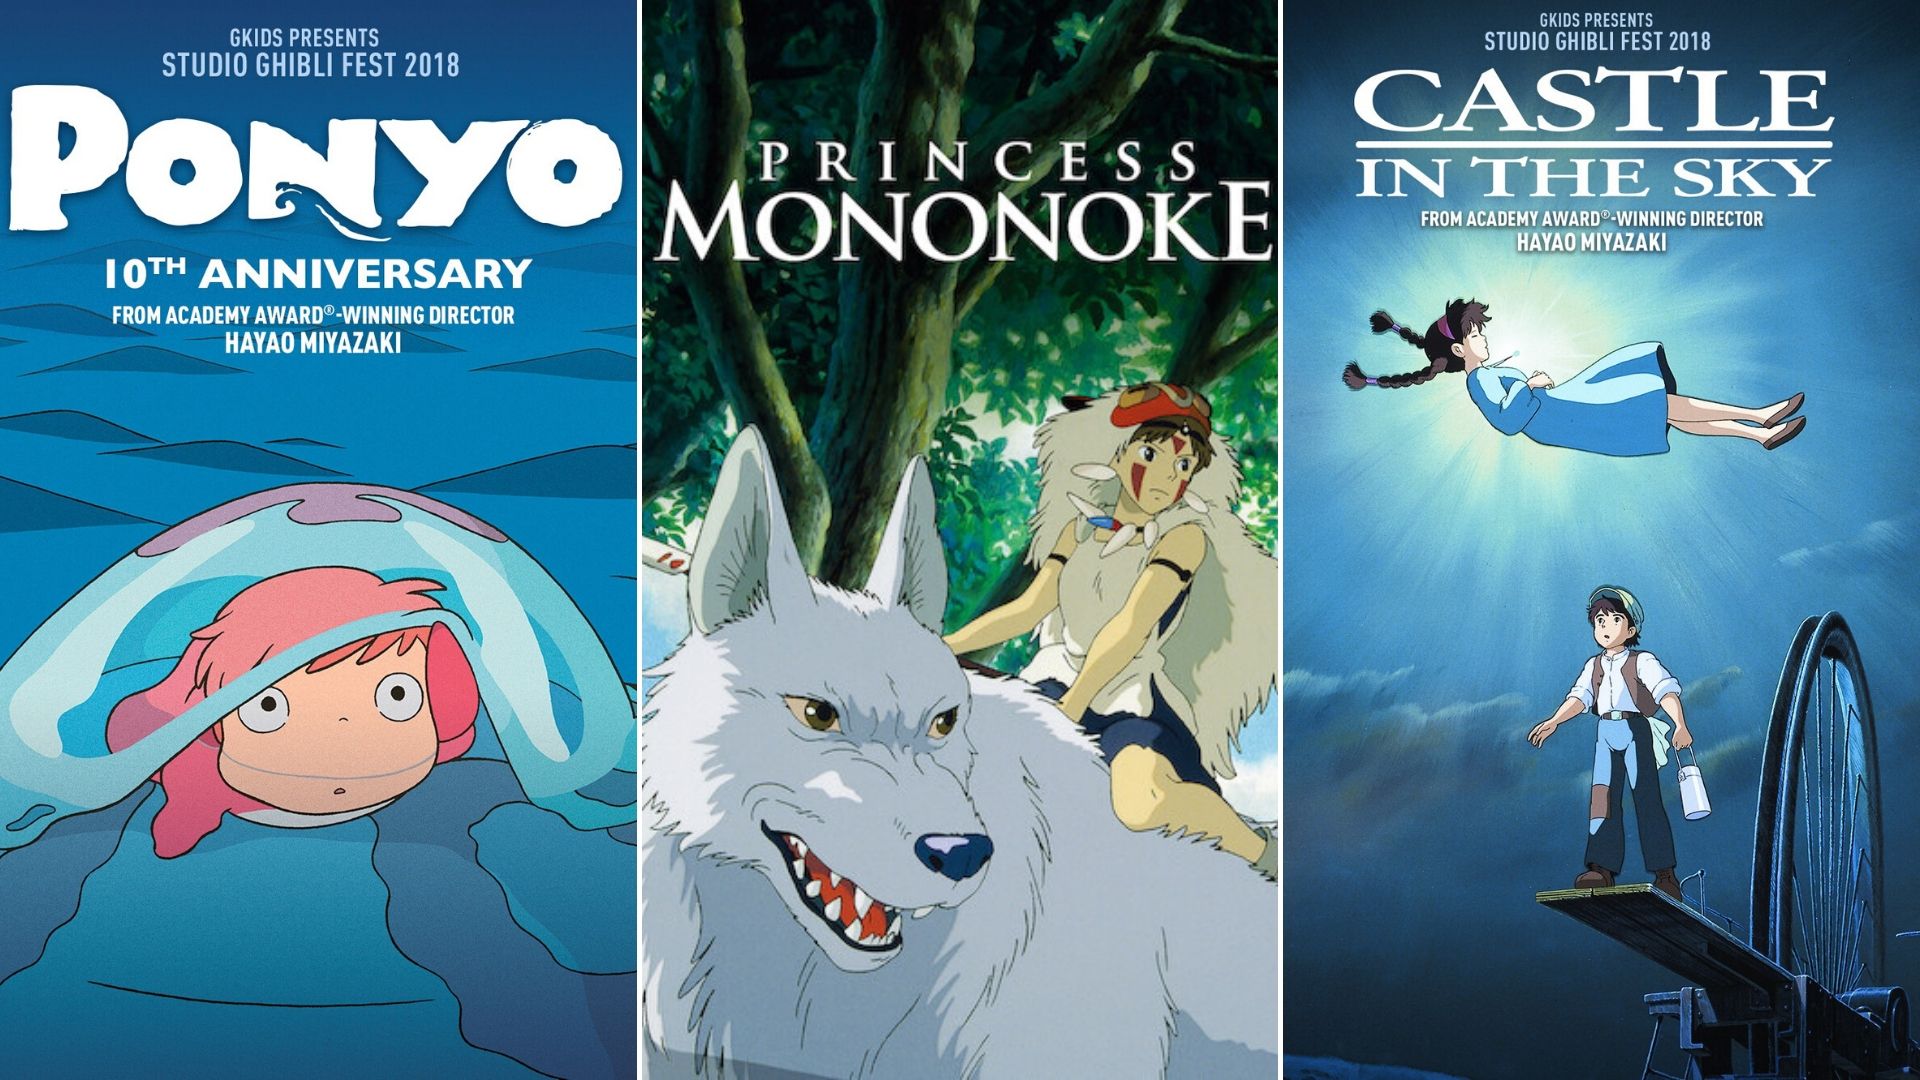 We’ve Ranked 10 Out Of The 21 Studio Ghibli Movies Available On Netflix Here Are Our Picks